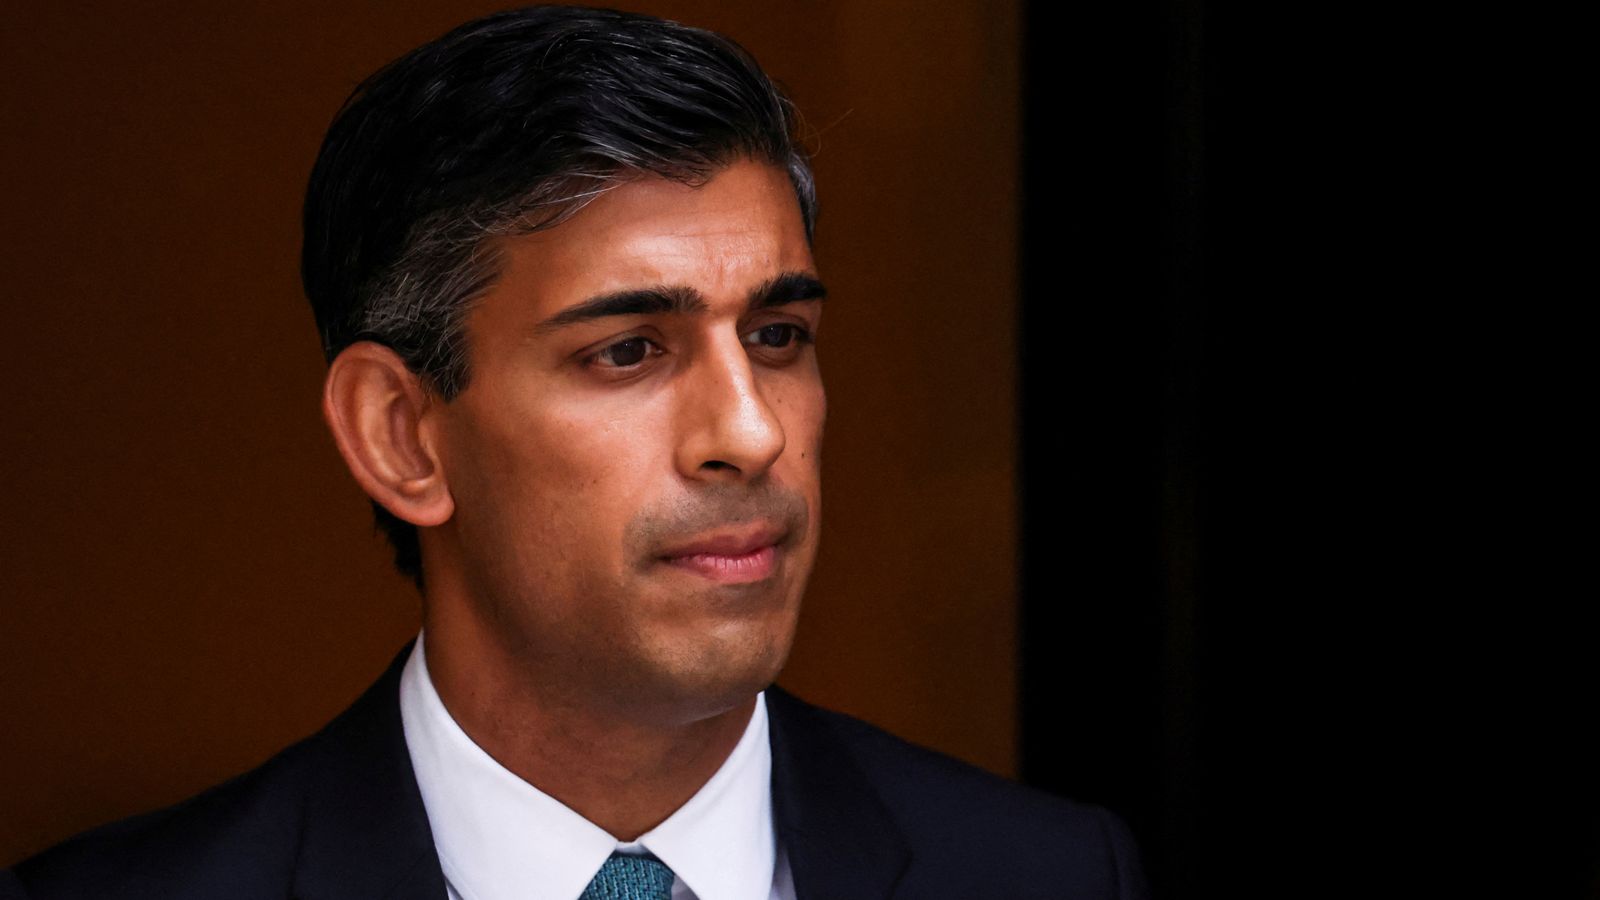 Rishi Sunak wants to be 'fiscal hawk' unafraid to make cuts - but at what cost financially and politically?